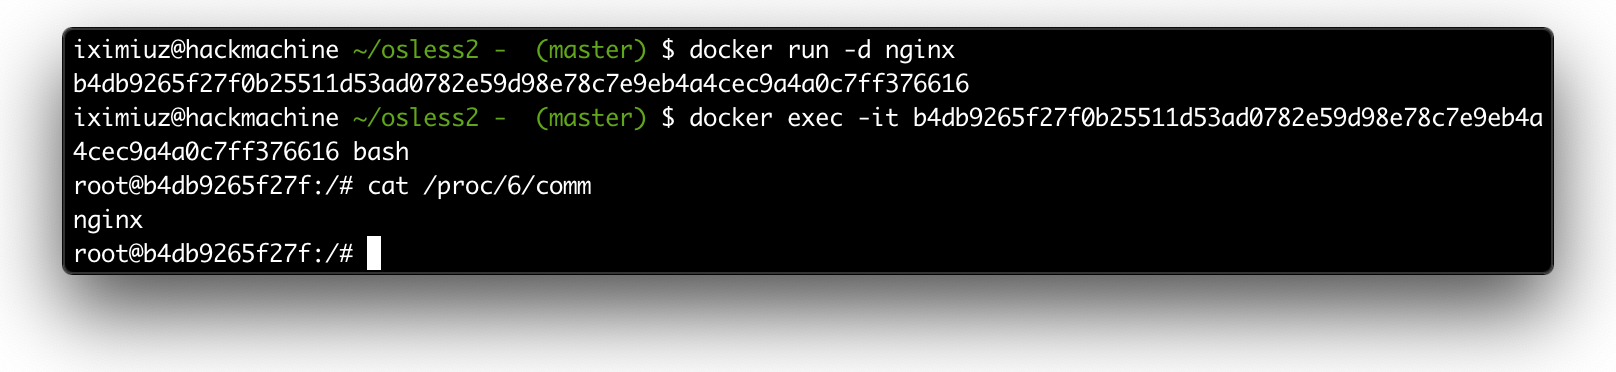 Interactive shell with running nginx container.